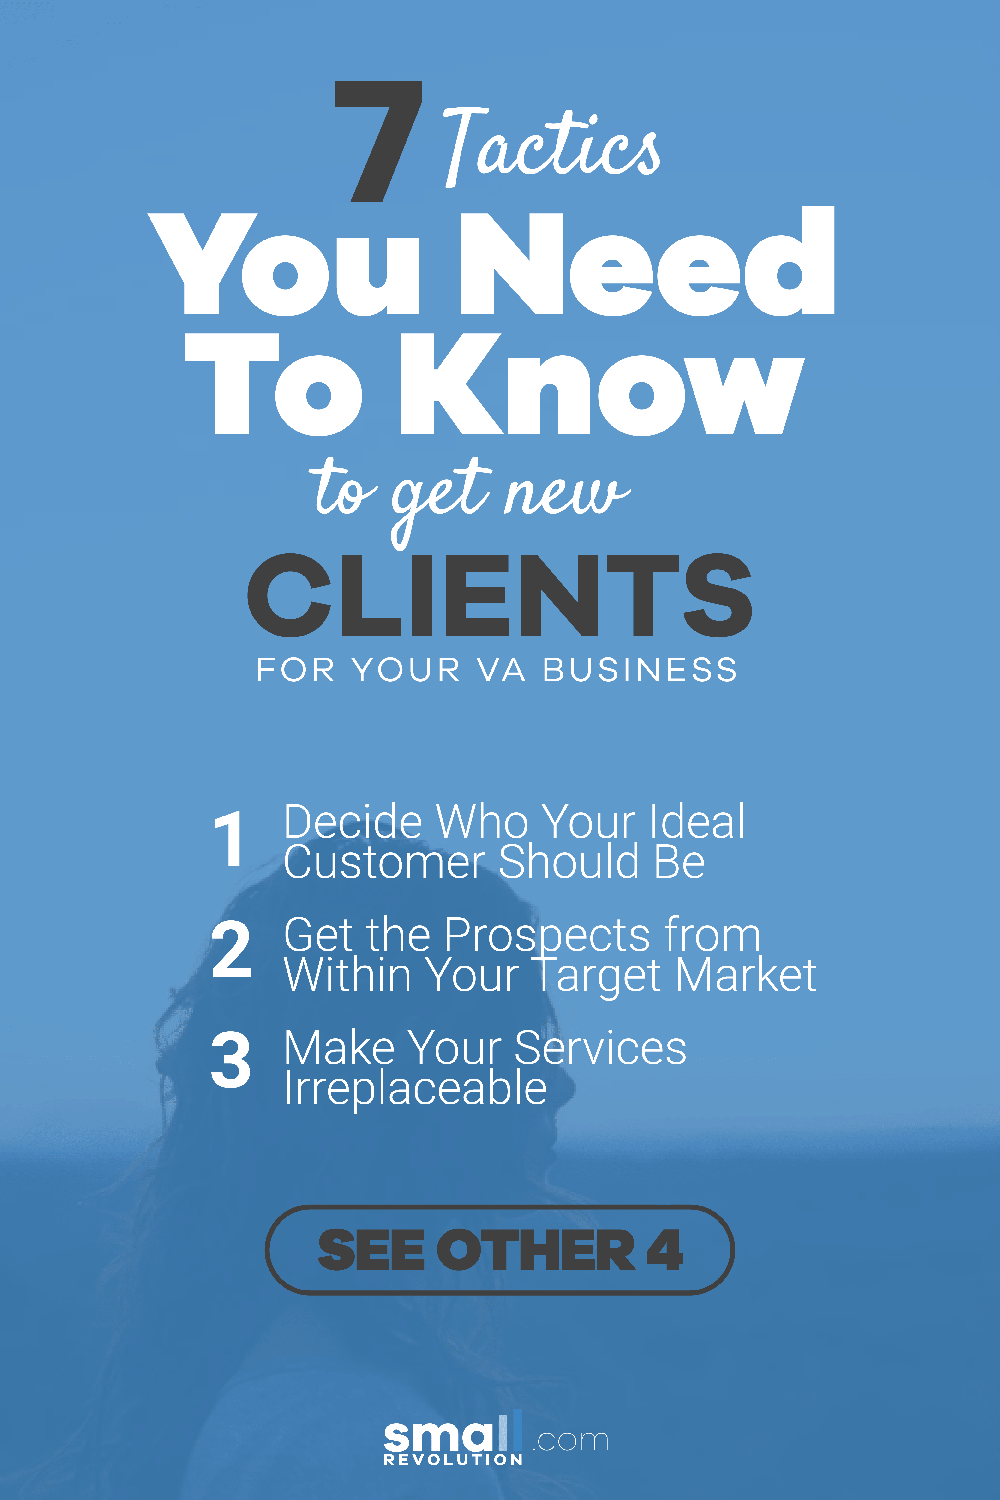 7 Things to know to get new clients for your VA business